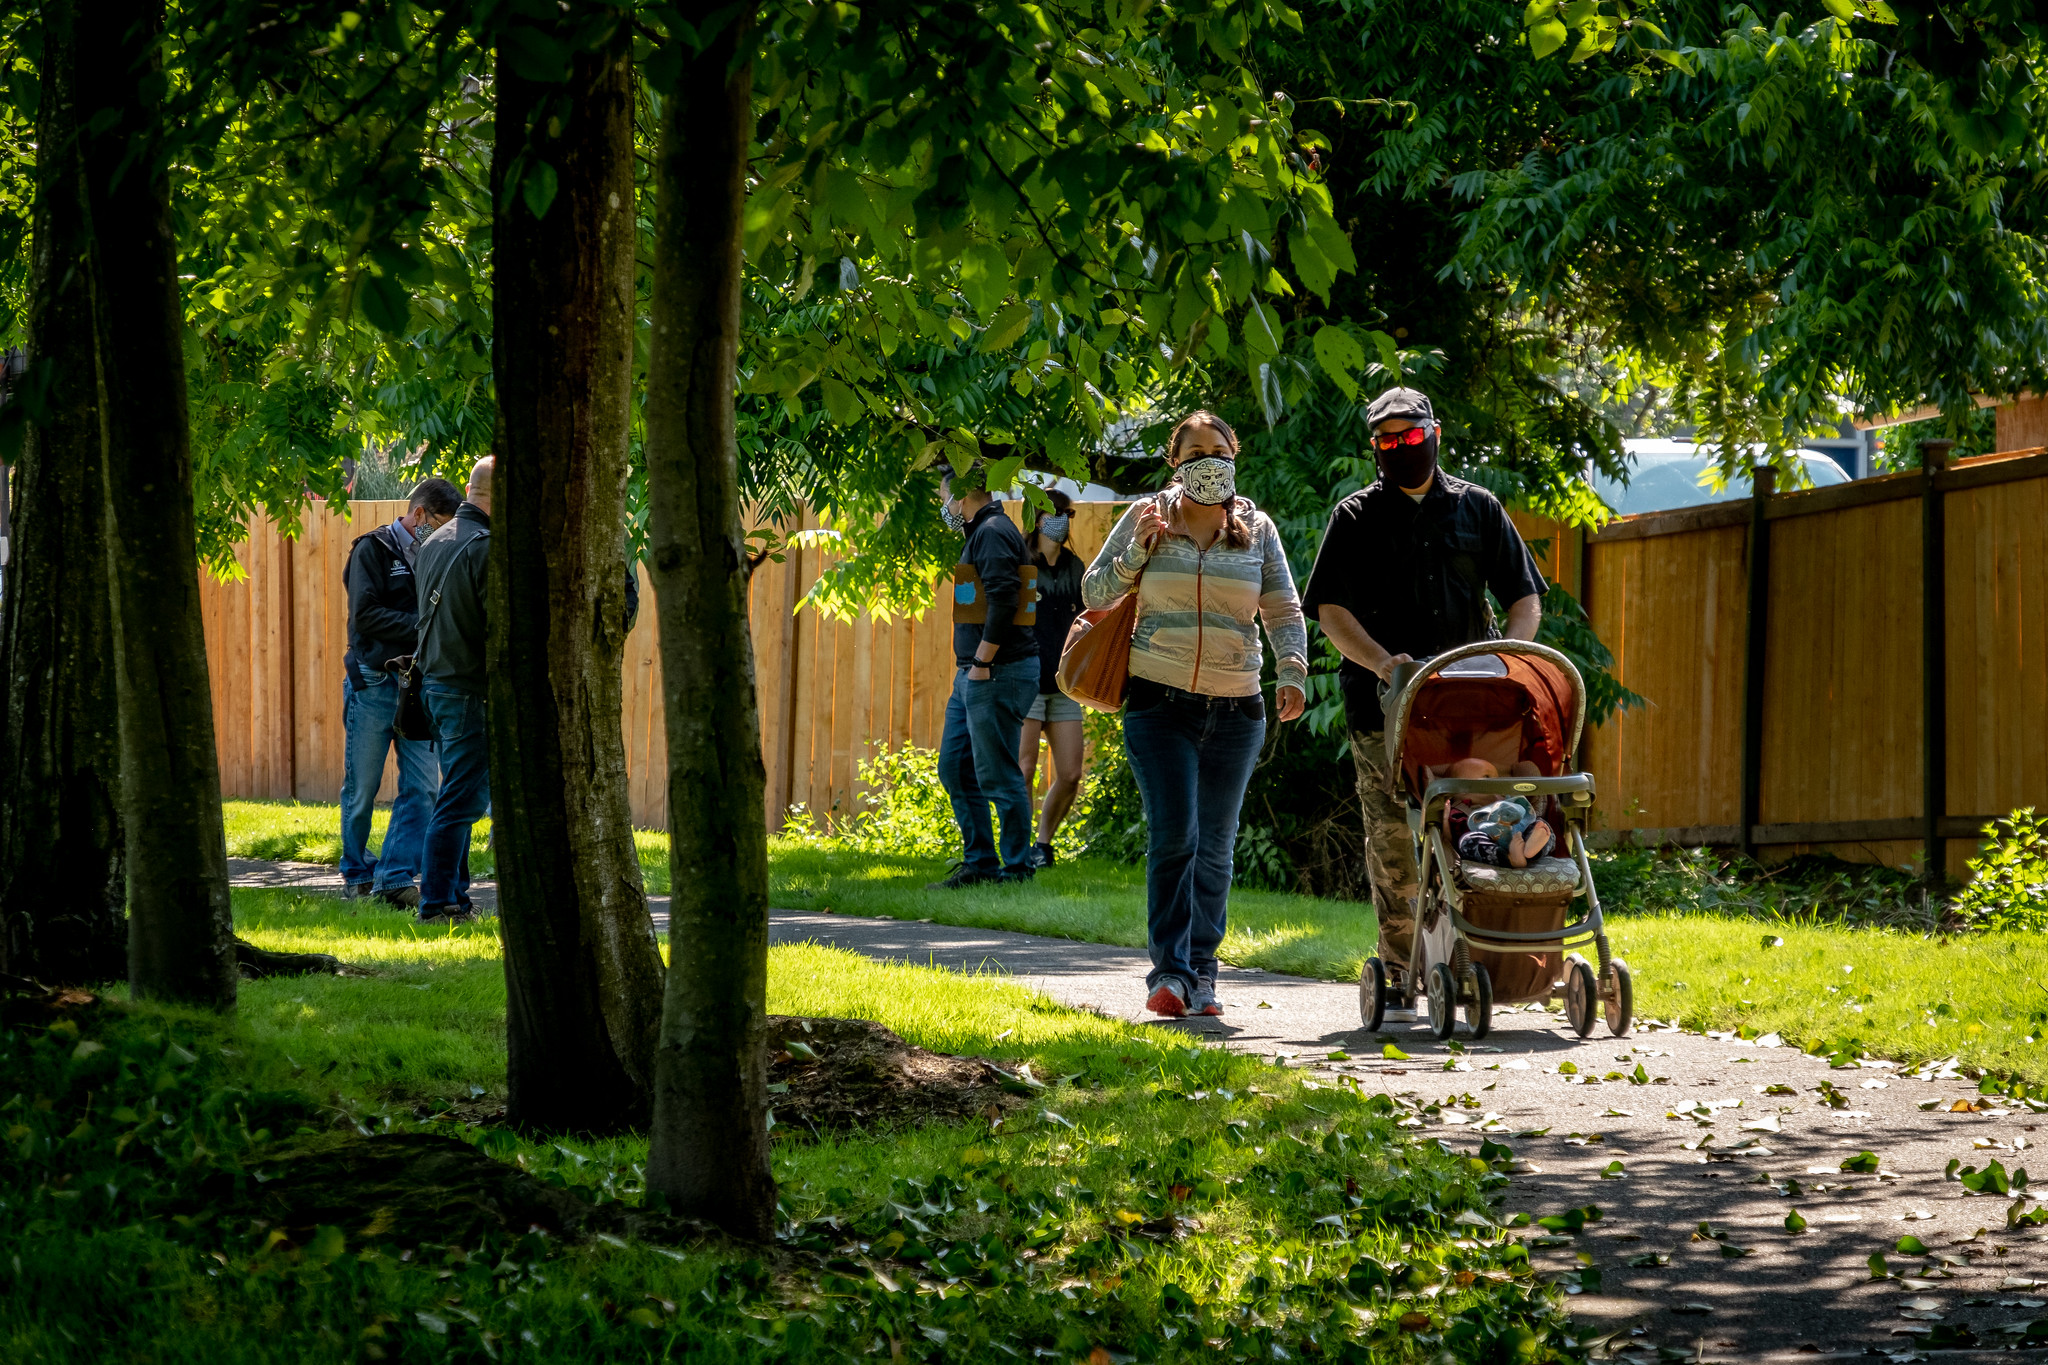 A couple with a baby in a stoller walk along a tree-lined path.